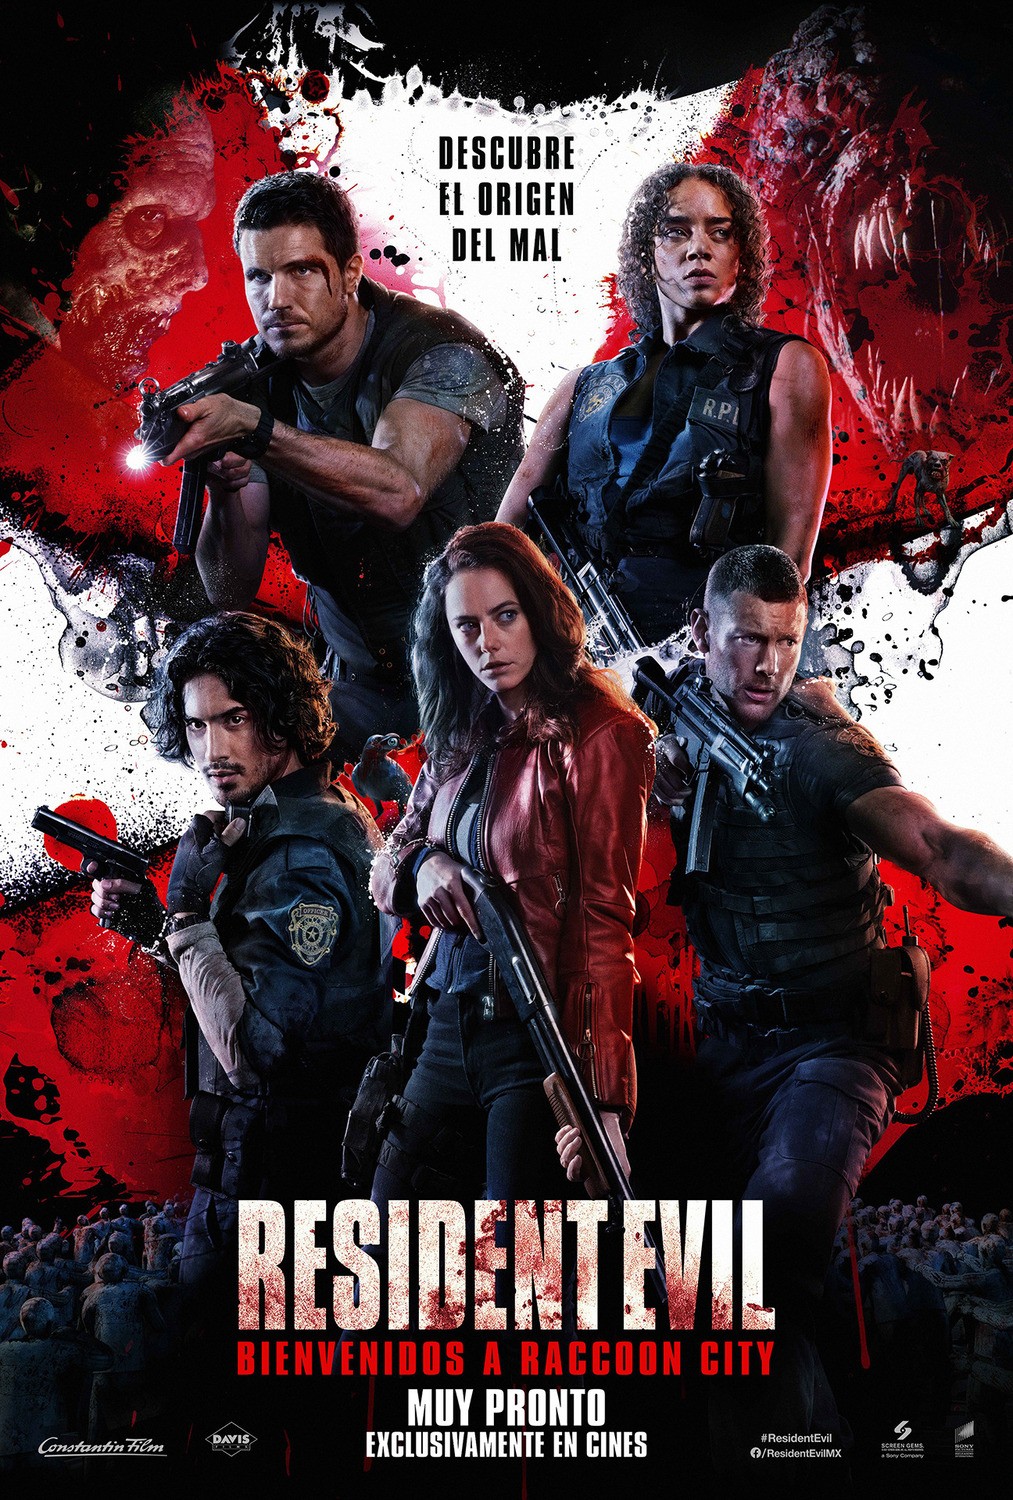 Resident Evil Welcome to Raccoon City (2021) 720p HDRip ORG Hindi Dual Audio Movie ESubs [800MB] Download